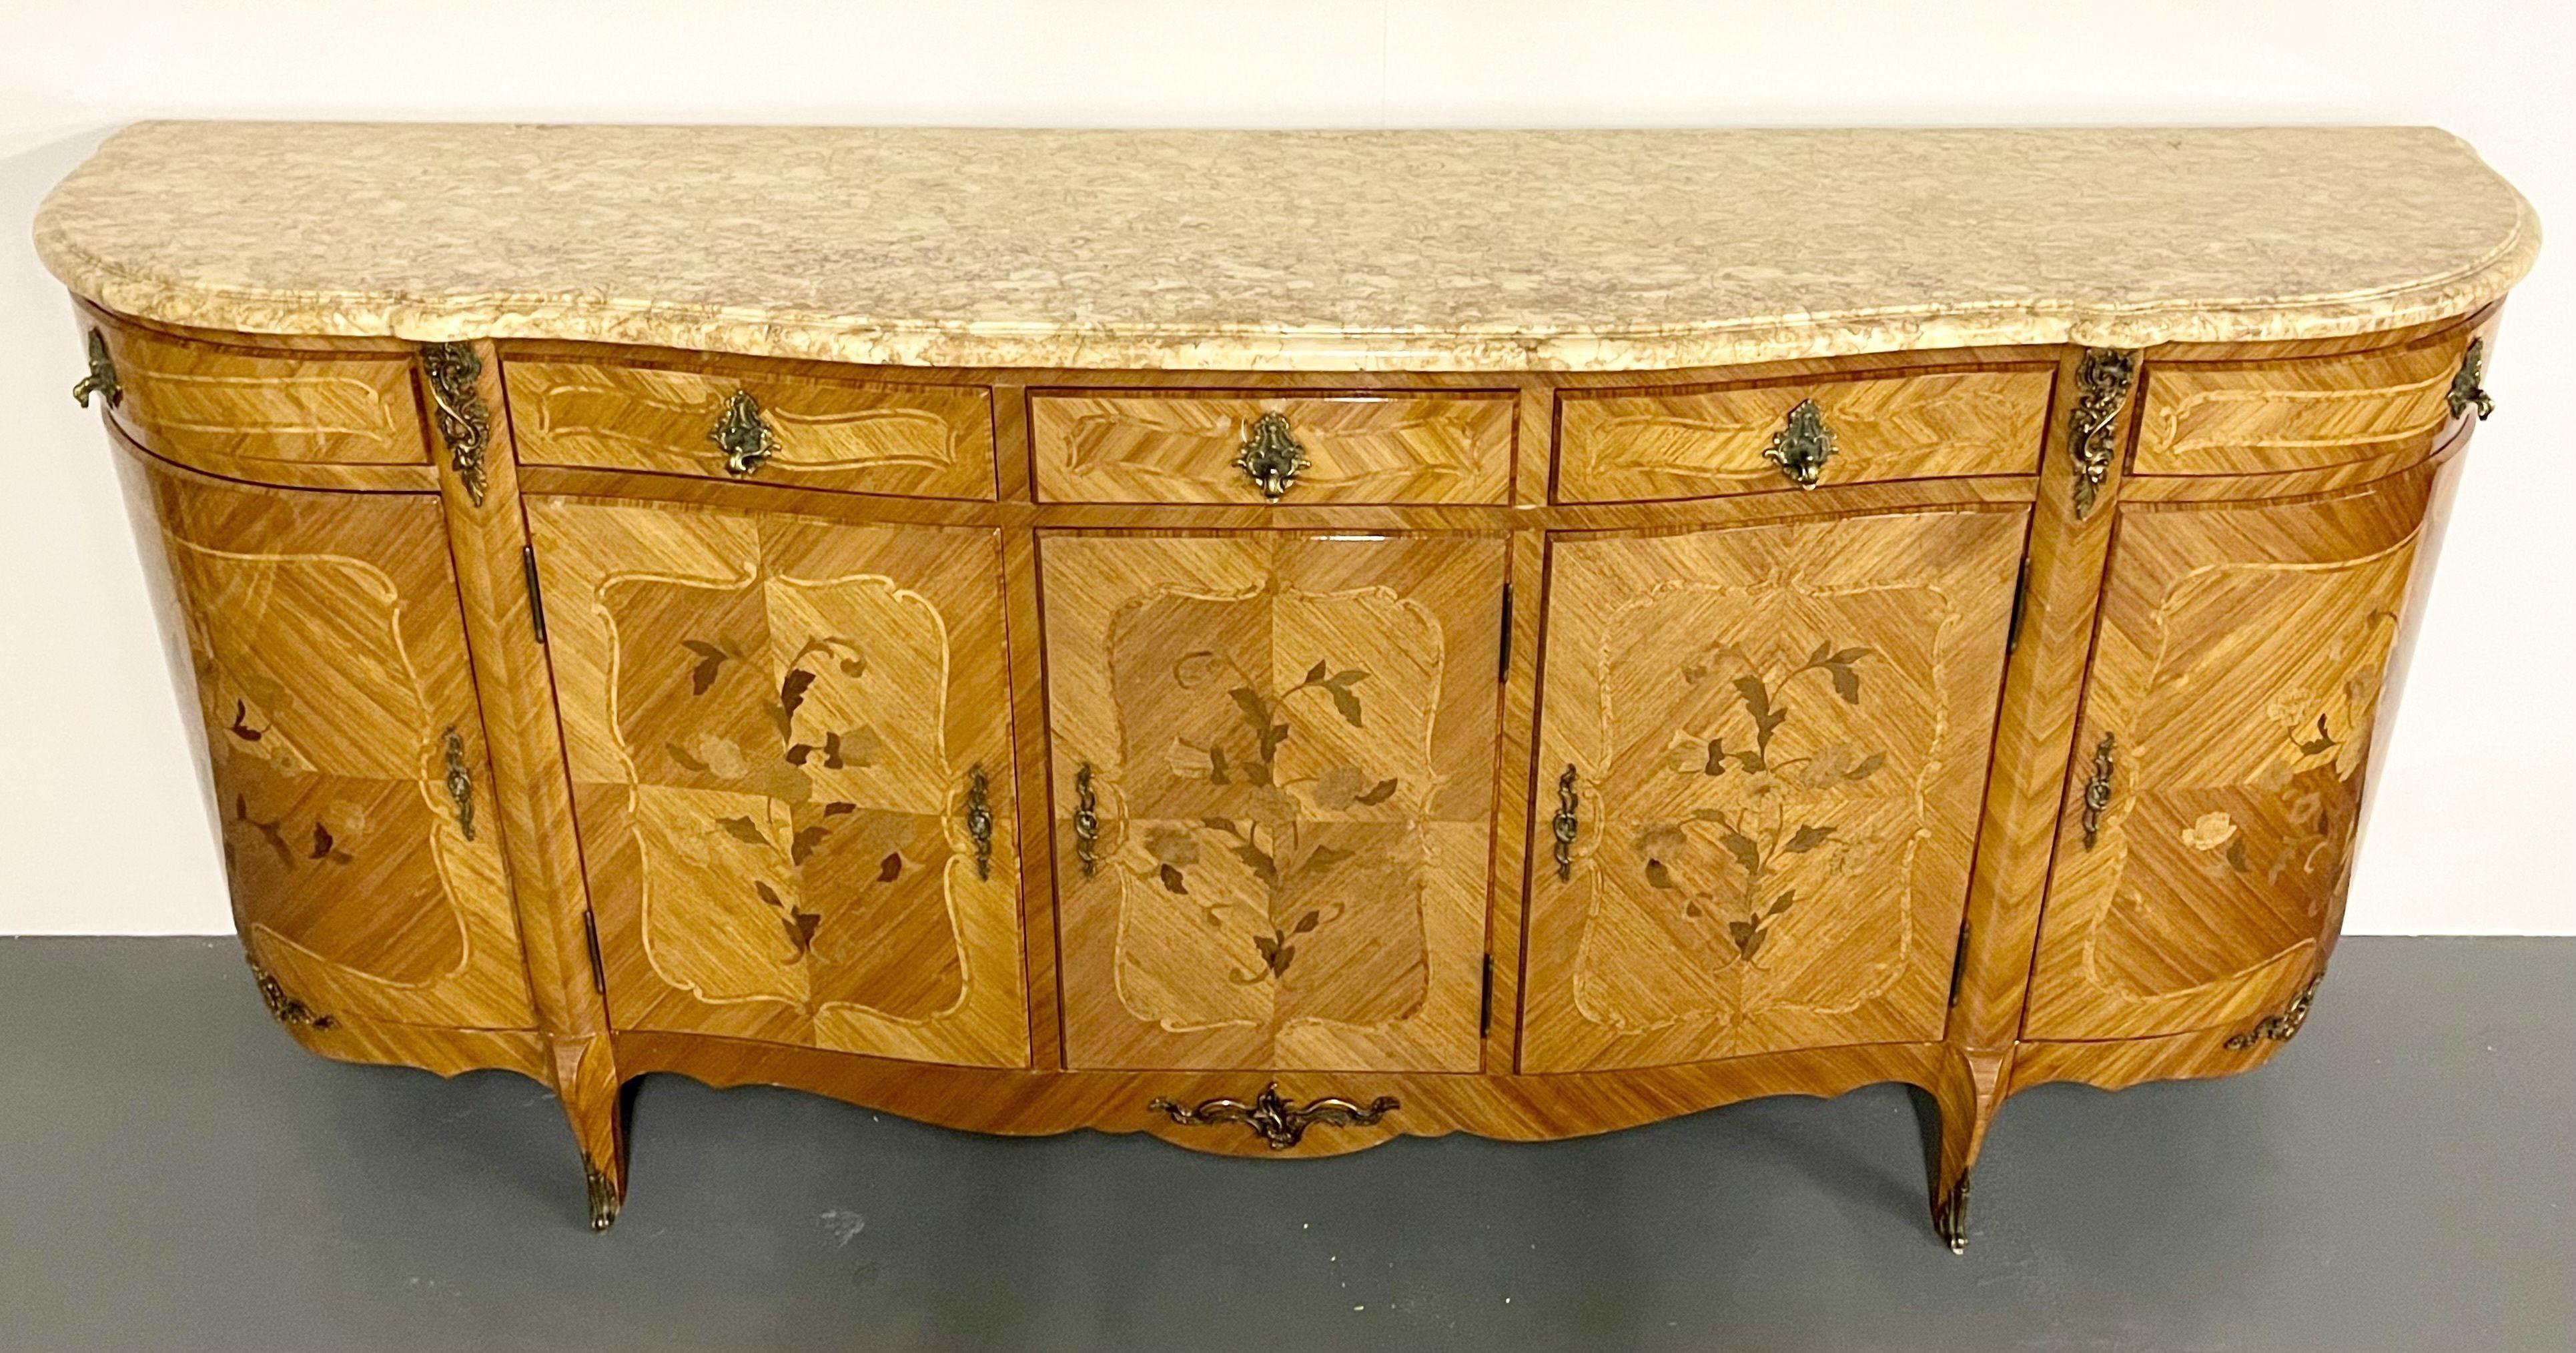 20th Century French Louis XV Style Sideboard, Inlaid, Marble Top, Monumental, Bronze Mounted